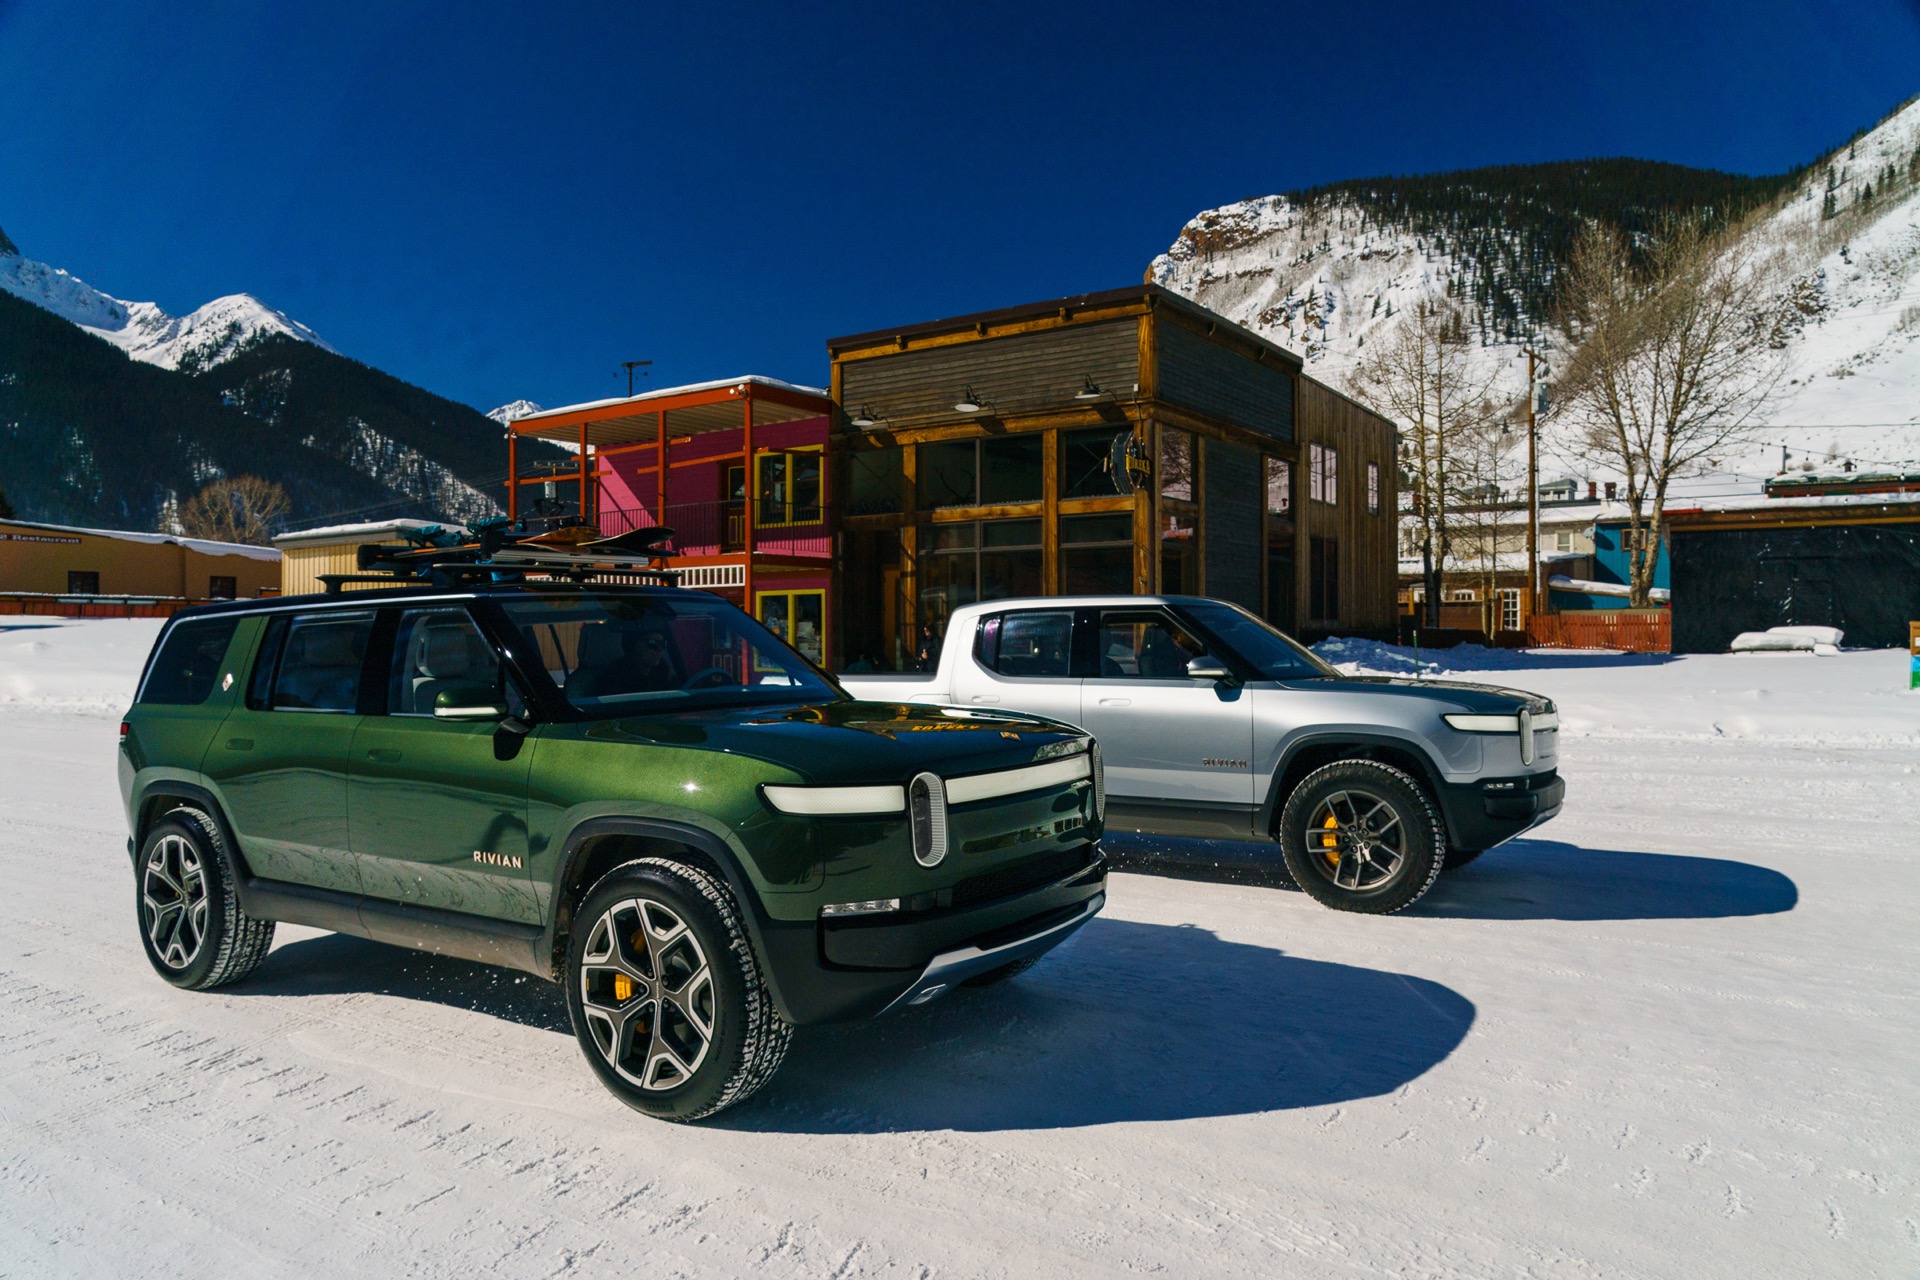 2022 Rivian R1T and R1S: Both electric trucks top 300 miles of EPA range2022 Rivian R1T and R1S: Both electric trucks top 300 miles of EPA range